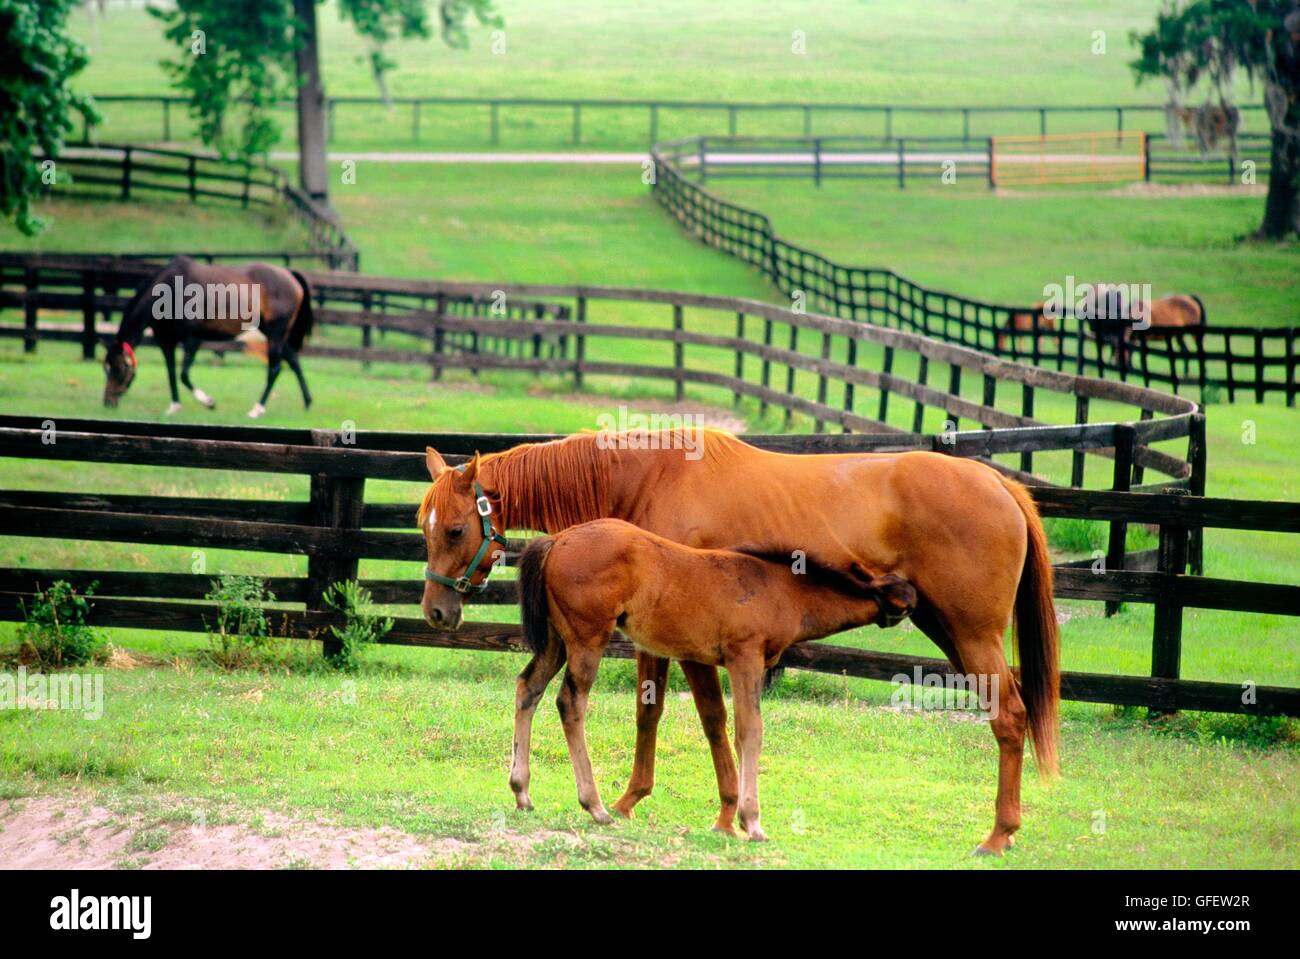 Thoroughbred brood mares in paddocks of stud horse farm known as Franks Farm near Ocala in Florida USA Stock Photo